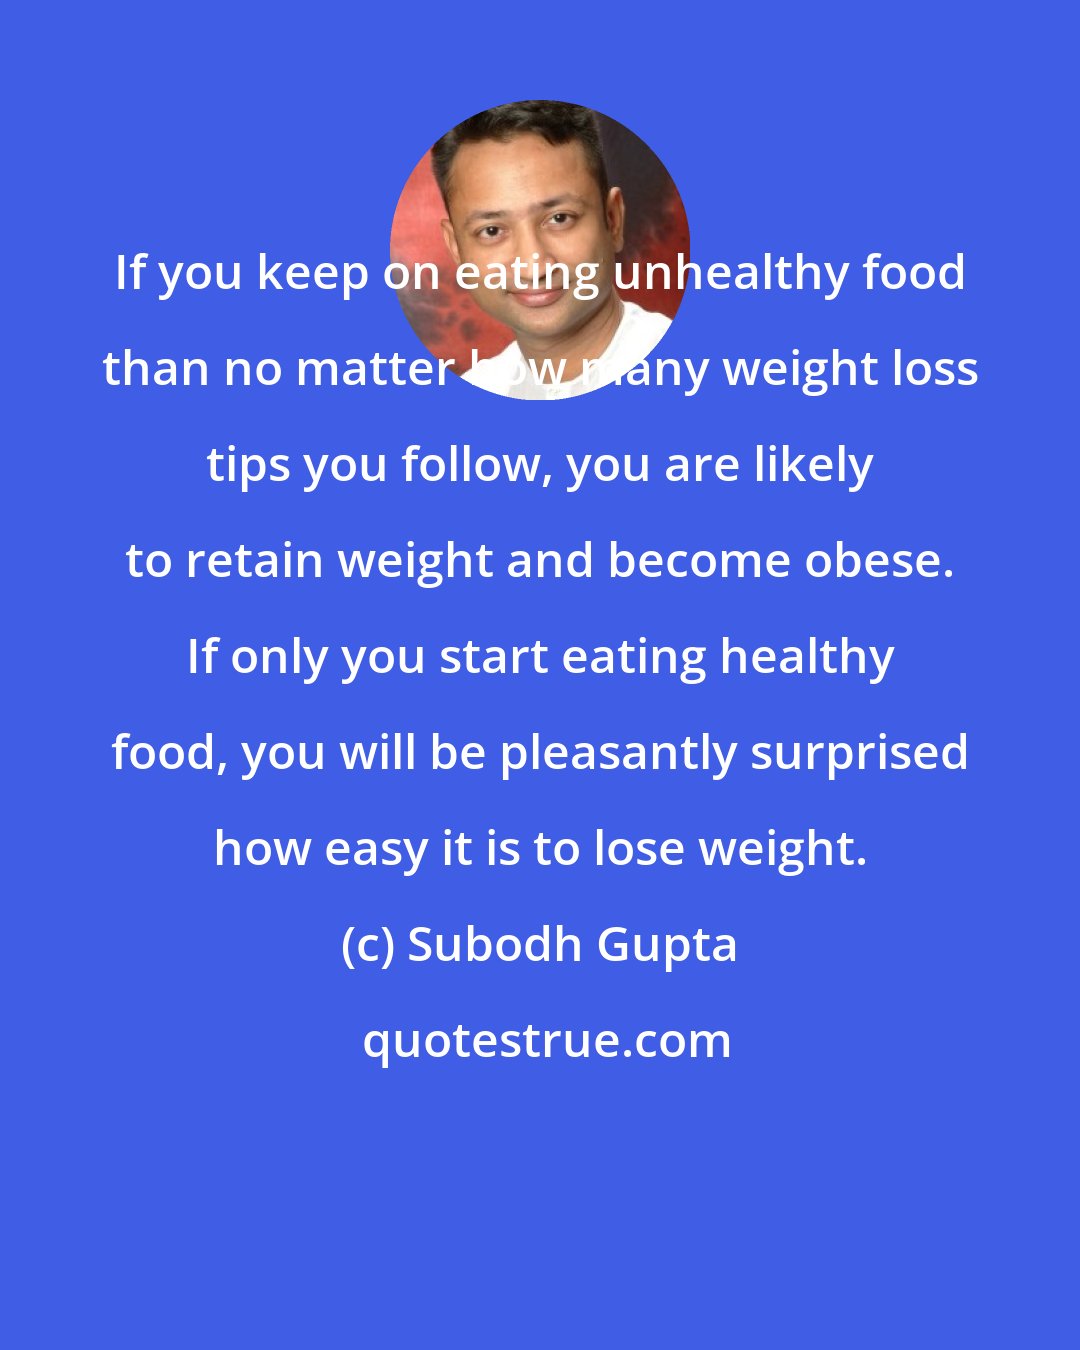 Subodh Gupta: If you keep on eating unhealthy food than no matter how many weight loss tips you follow, you are likely to retain weight and become obese. If only you start eating healthy food, you will be pleasantly surprised how easy it is to lose weight.